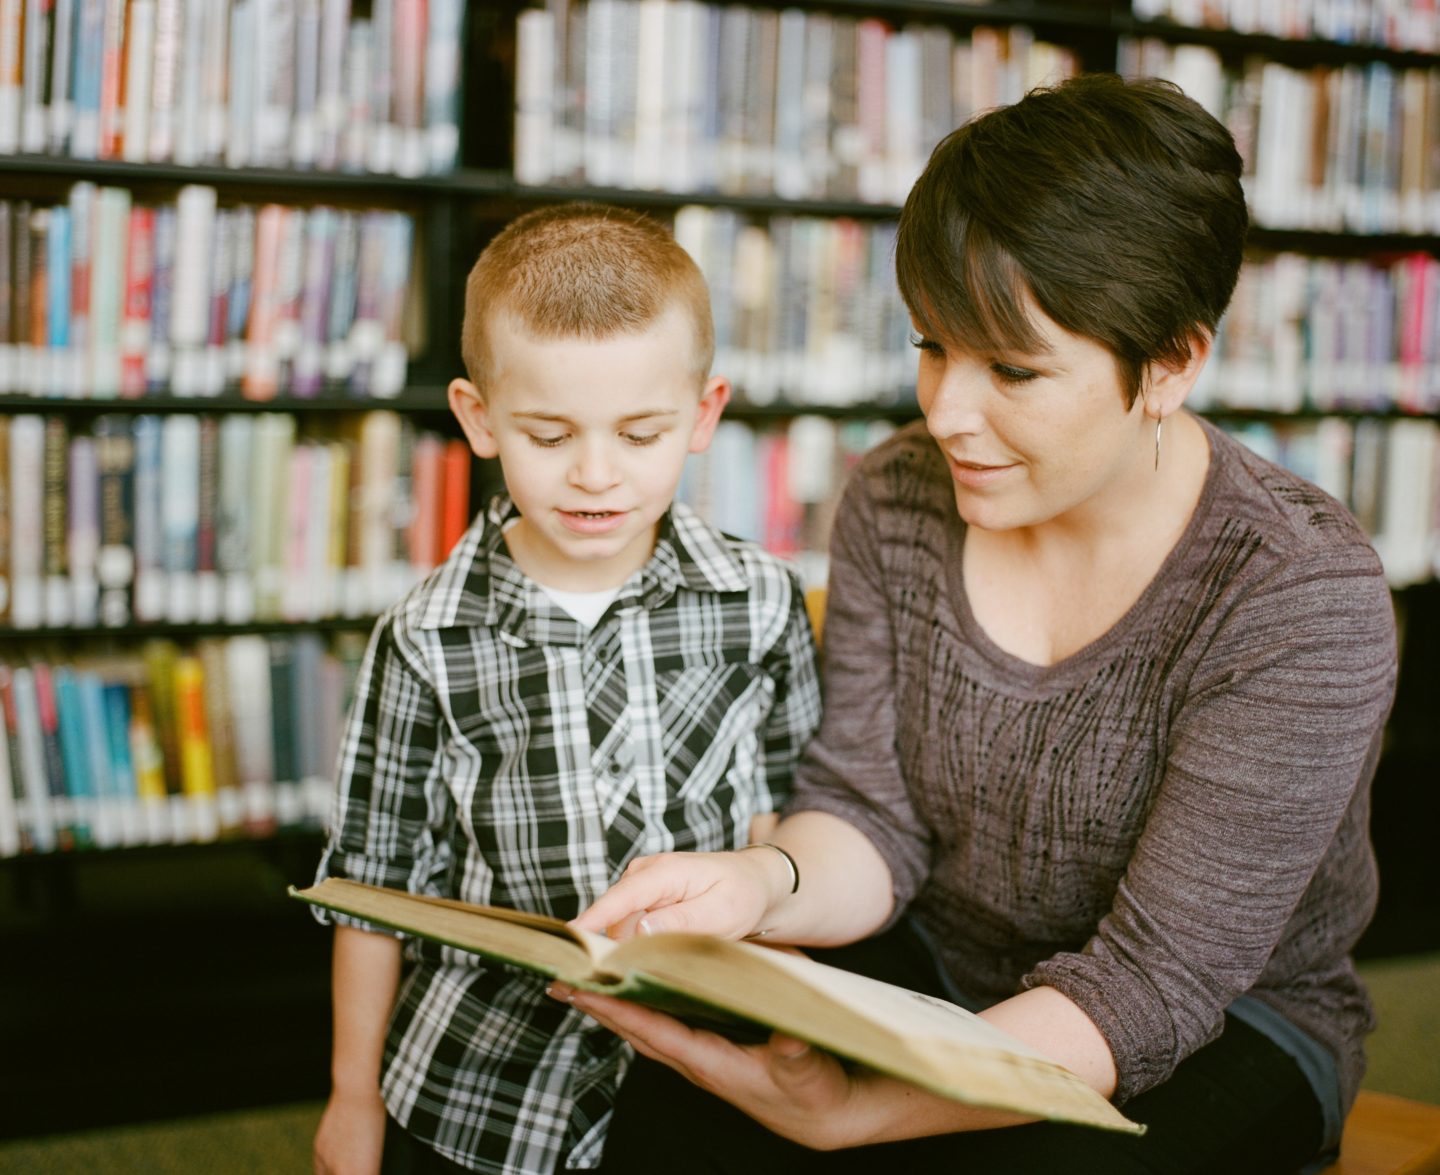 teach at home moment: mom showing son book